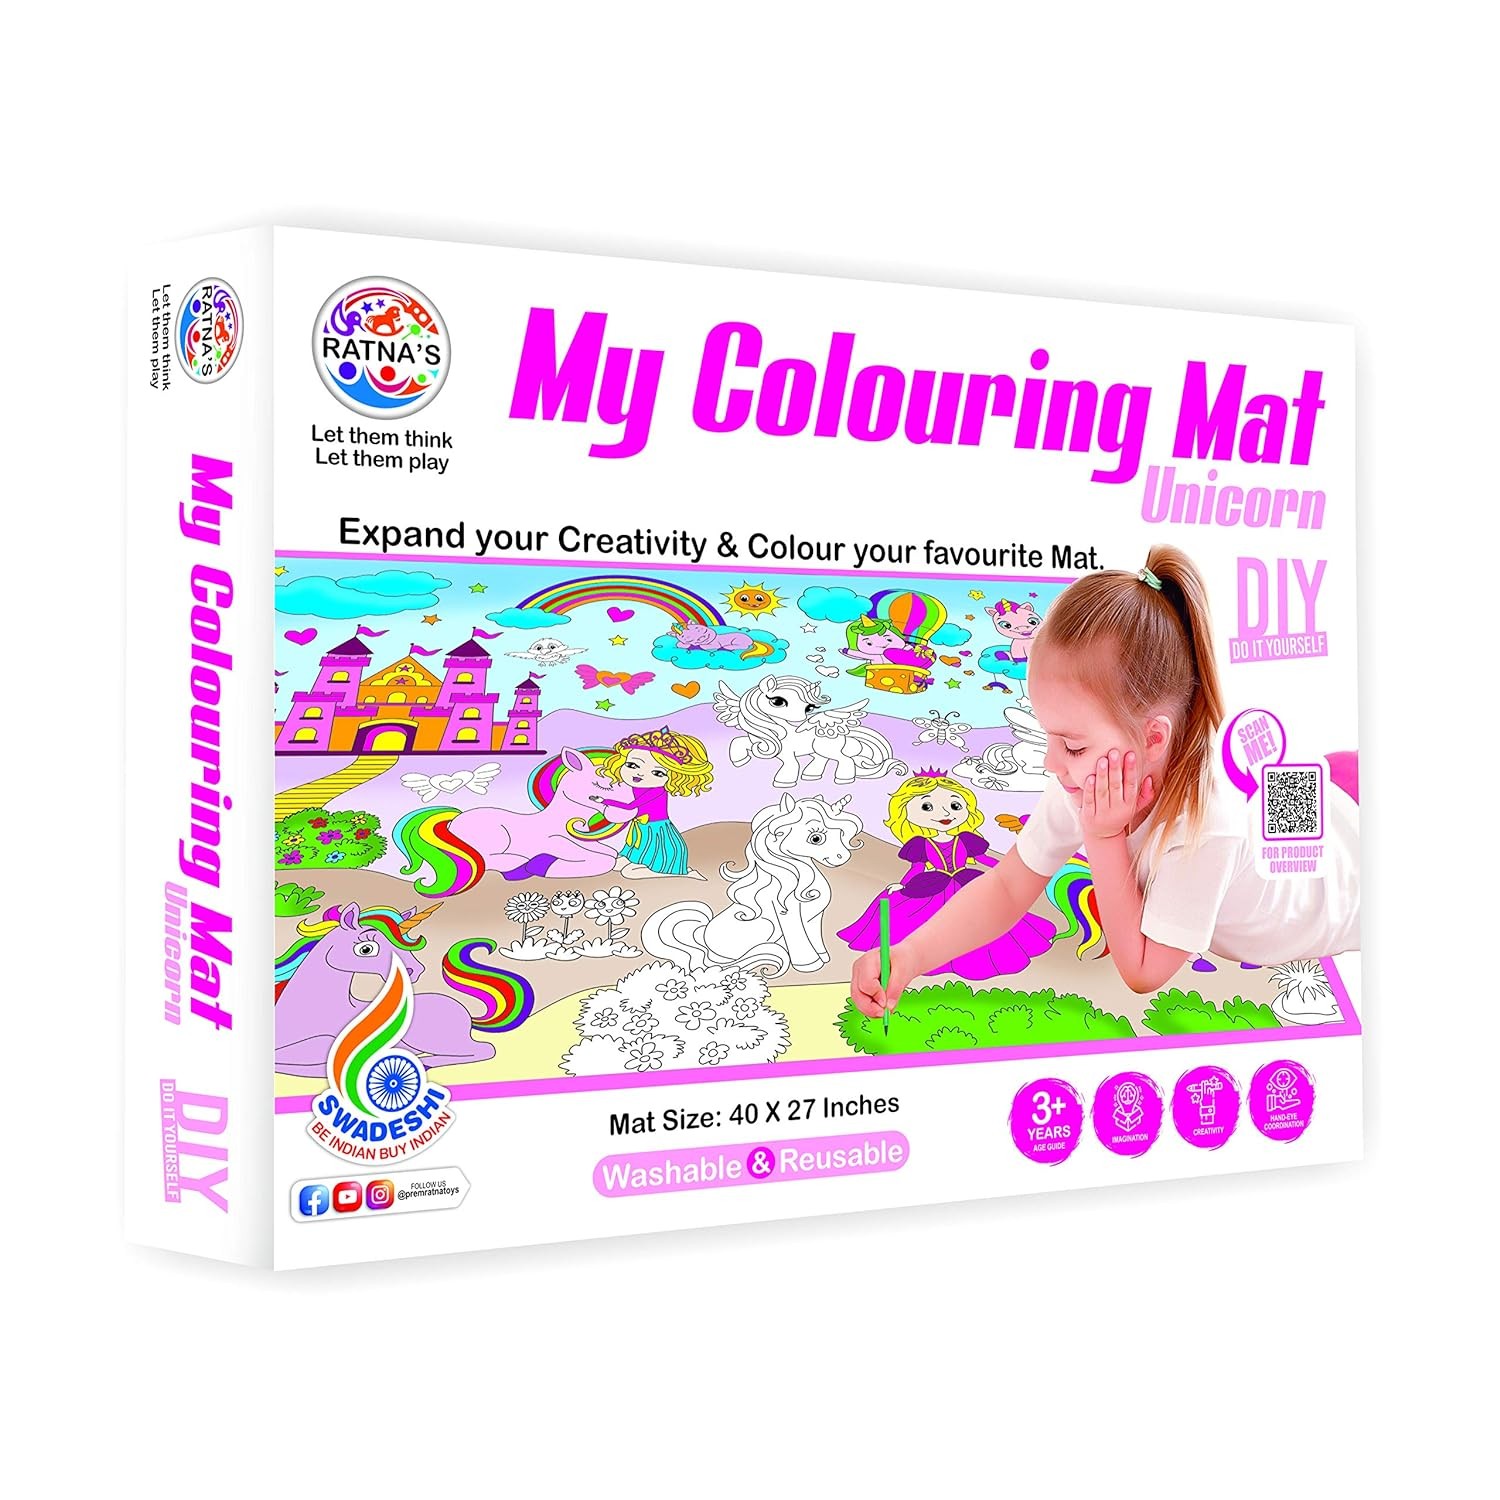 RATNA'S My Colouring MAT for Kids Reusable and Washable. Big MAT for Colouring. MAT Size(40 INCHES X 27 INCHES) (Unicorn Theme)